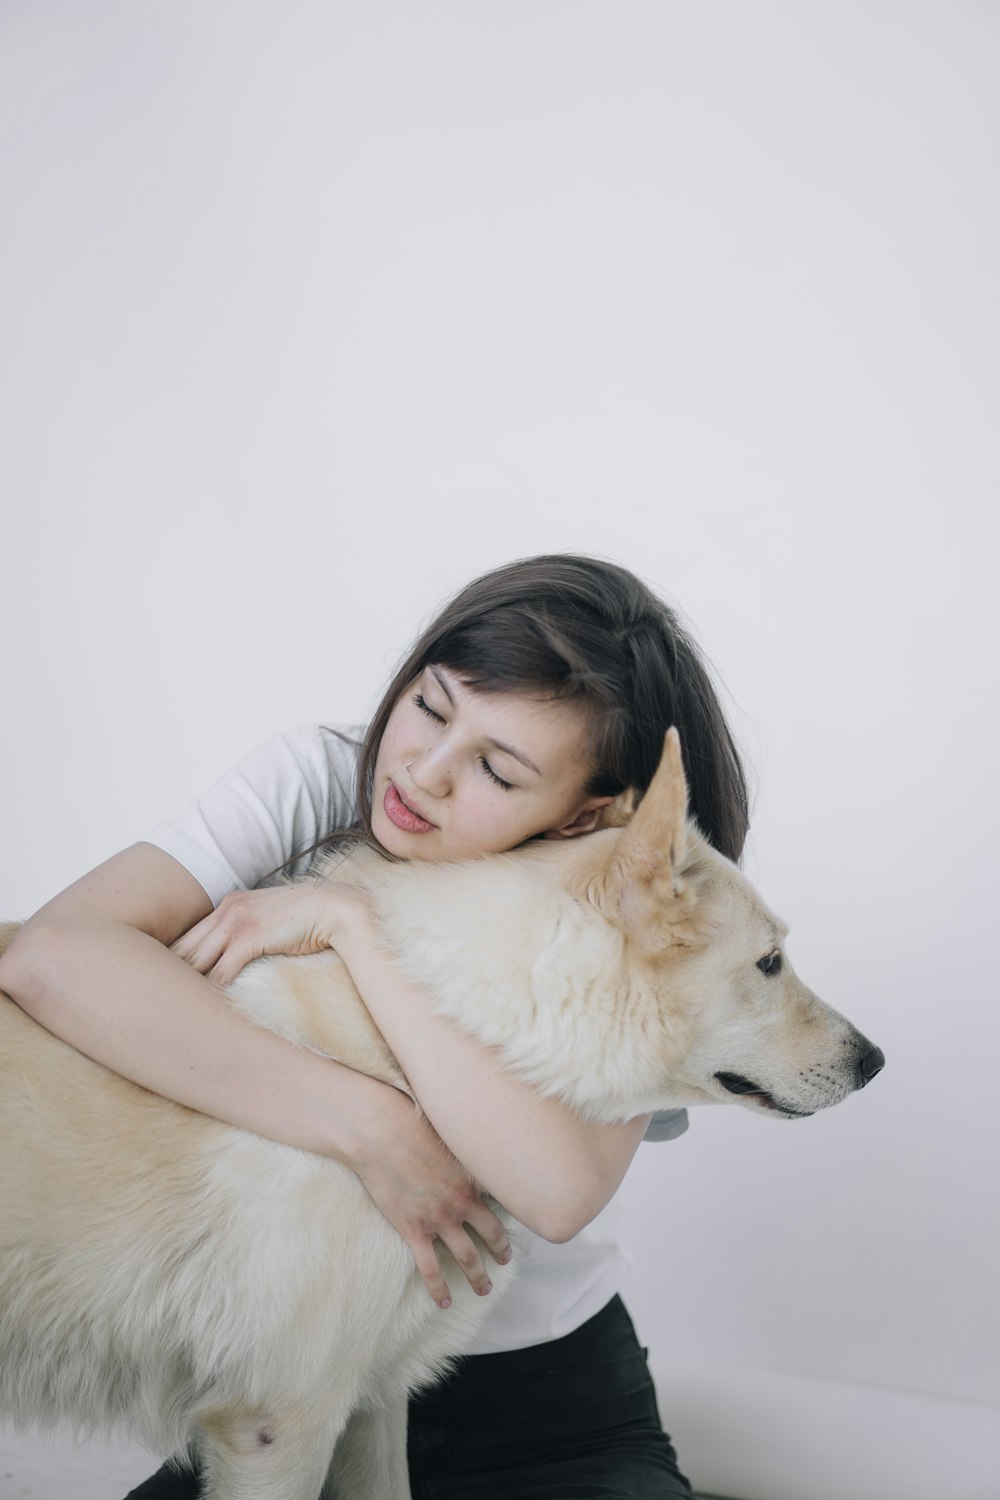 350+ Girl With Animal Pictures | Download Free Images on Unsplash